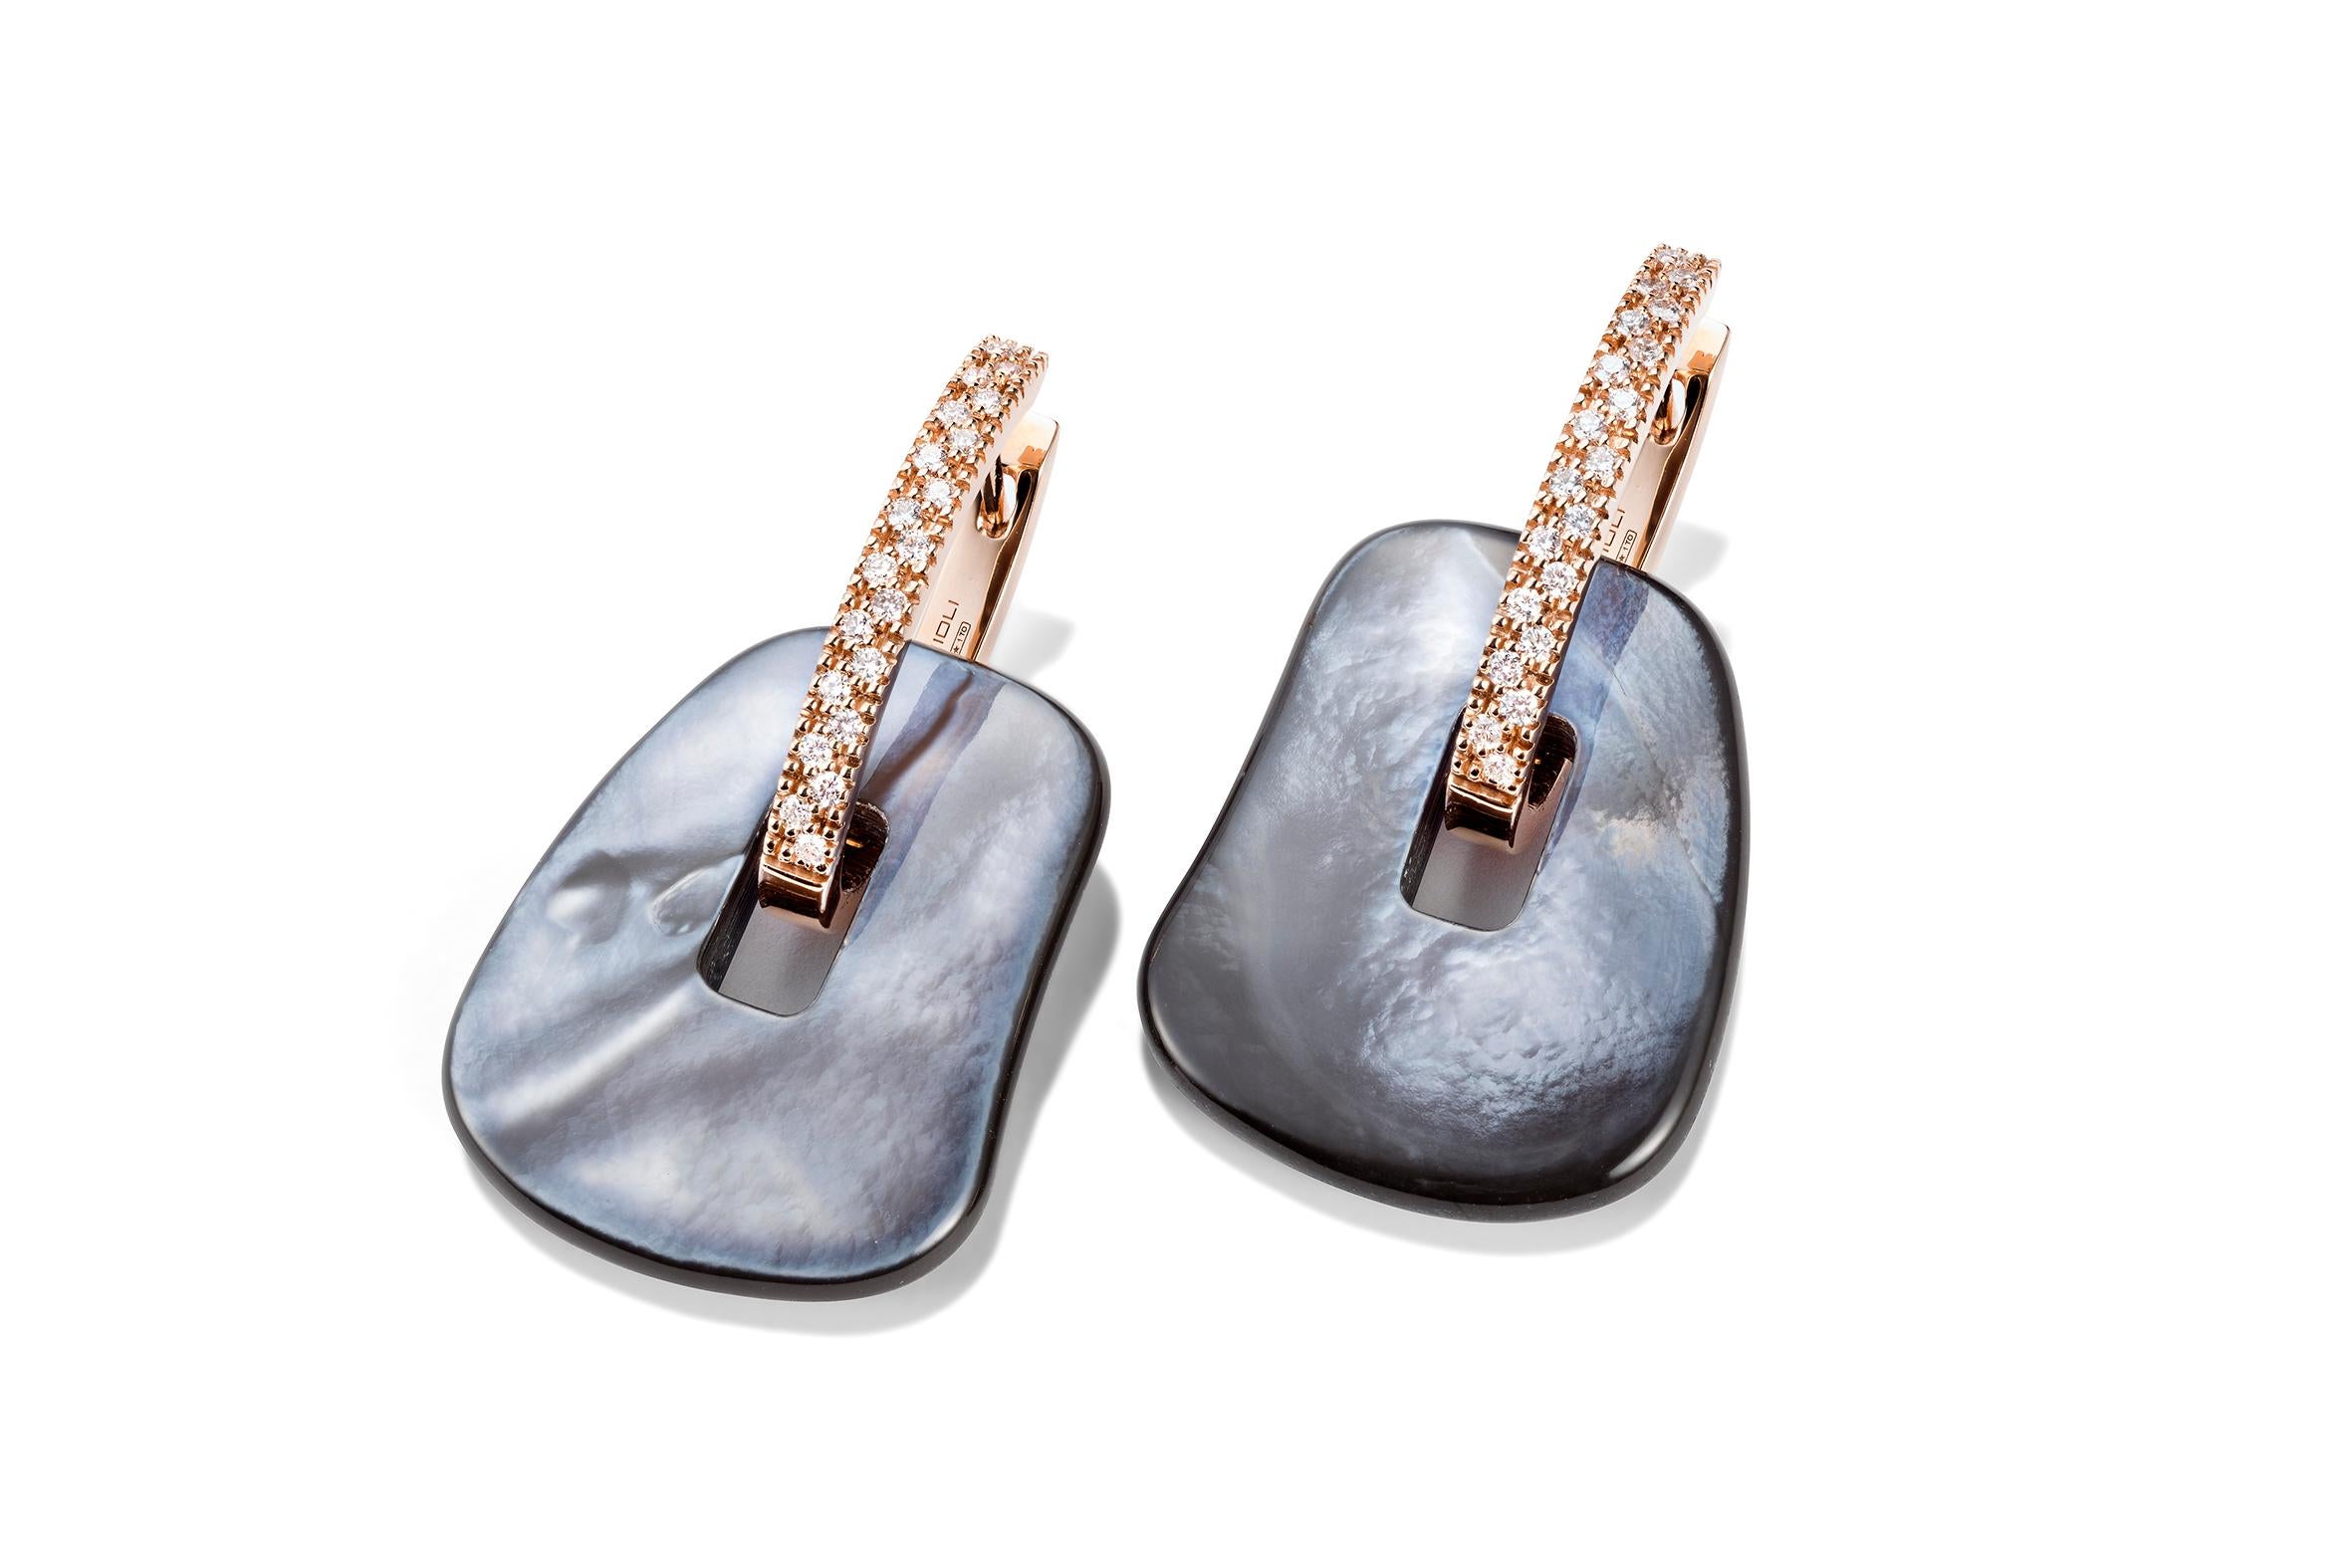 Mattioli Puzzle Safari Medium 18K Rose Gold Earrings Brown Enamel w/White Diamonds
Also available in Brown Diamonds
Earrings in rose gold 
Diamonds carat 0.40 ct
Weight 19.60 gr  Measure 22x27mm or 0.75 inches
Puzzle pendants of mother of pearl you